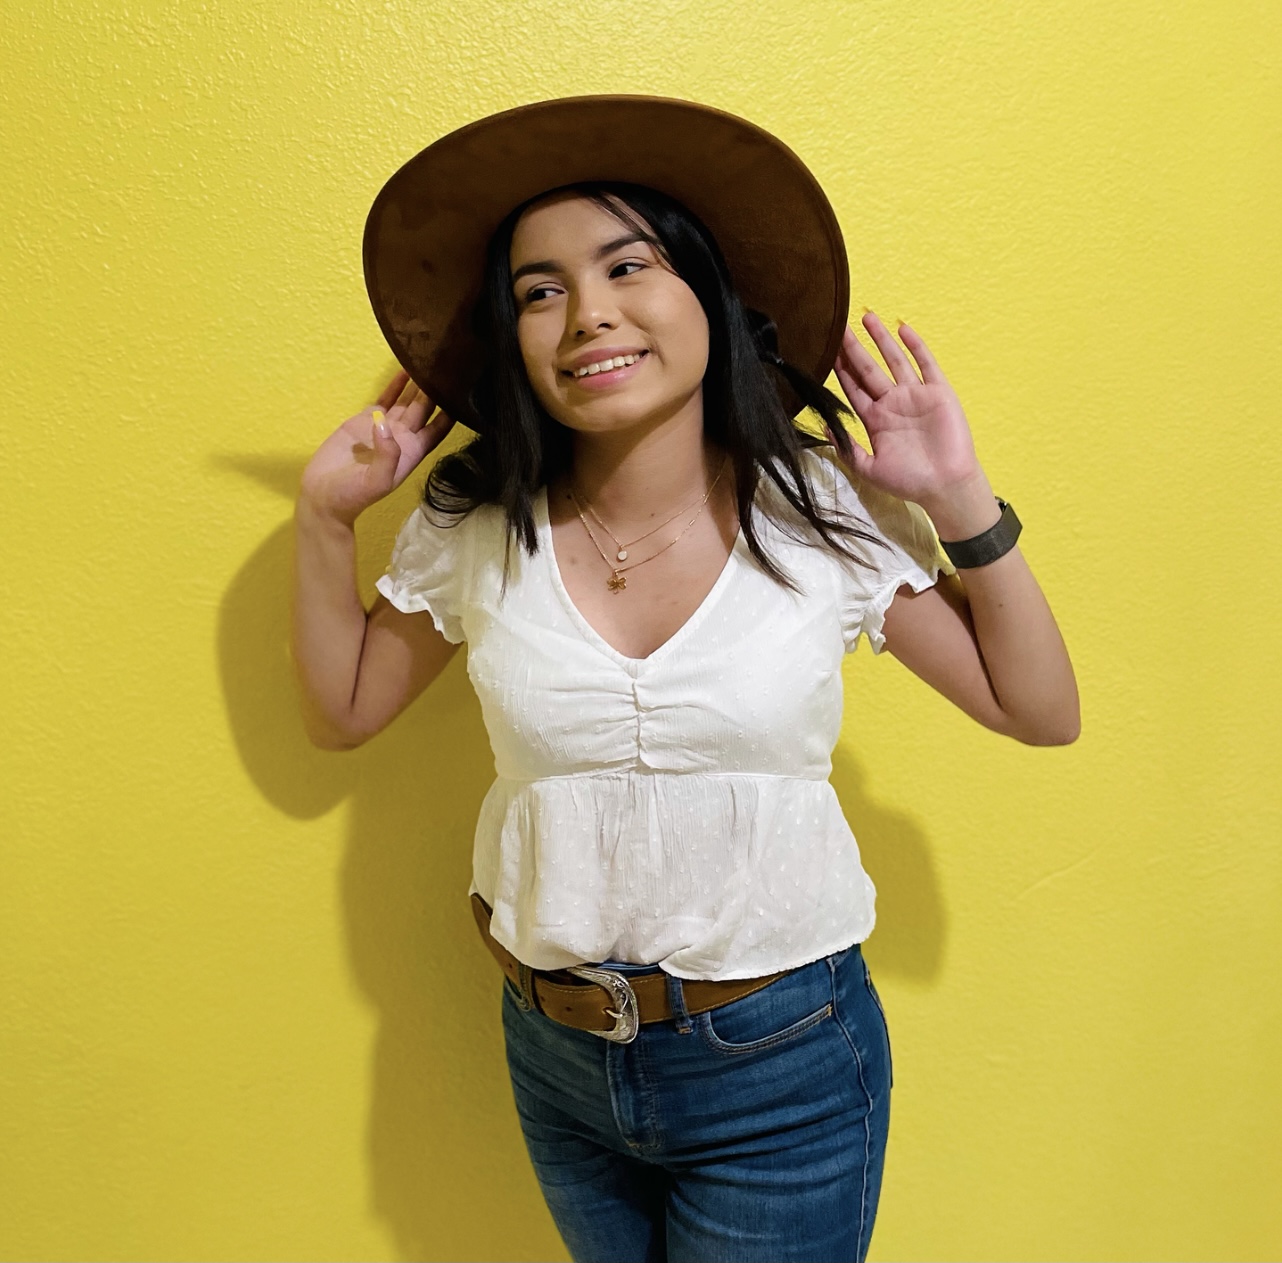 Female smiling with shoulder length black hair reaching up toward a wide brimmed hat, white blouse and jeans. The background is a bright yellow.